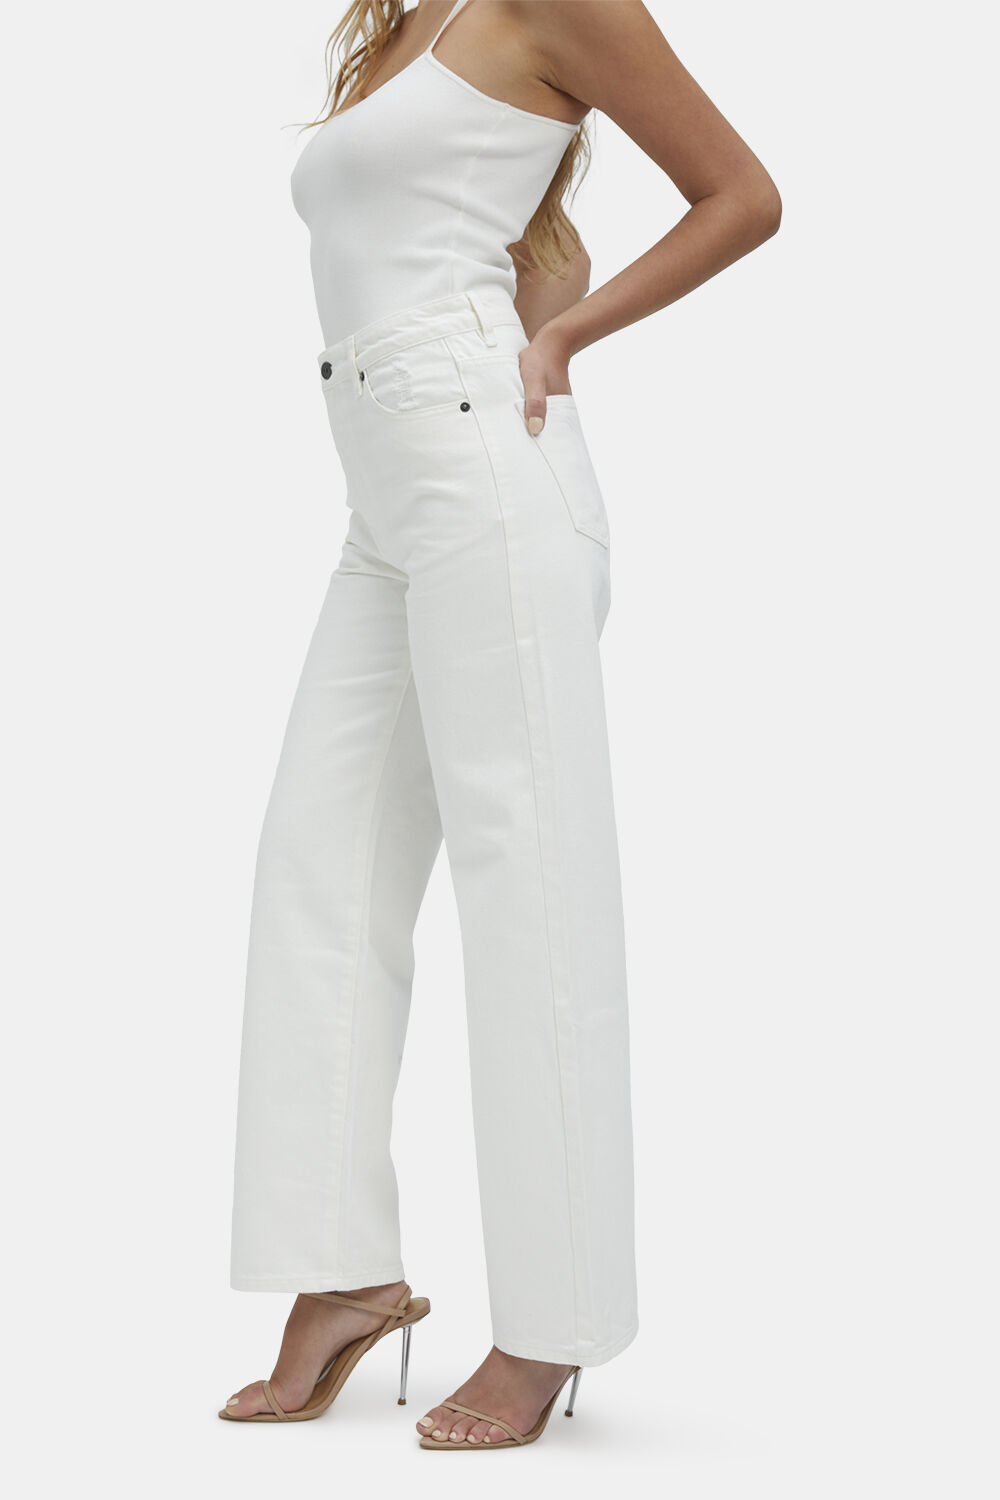 PIA STRAIGHT JEAN IN IVORY in colour CLOUD DANCER